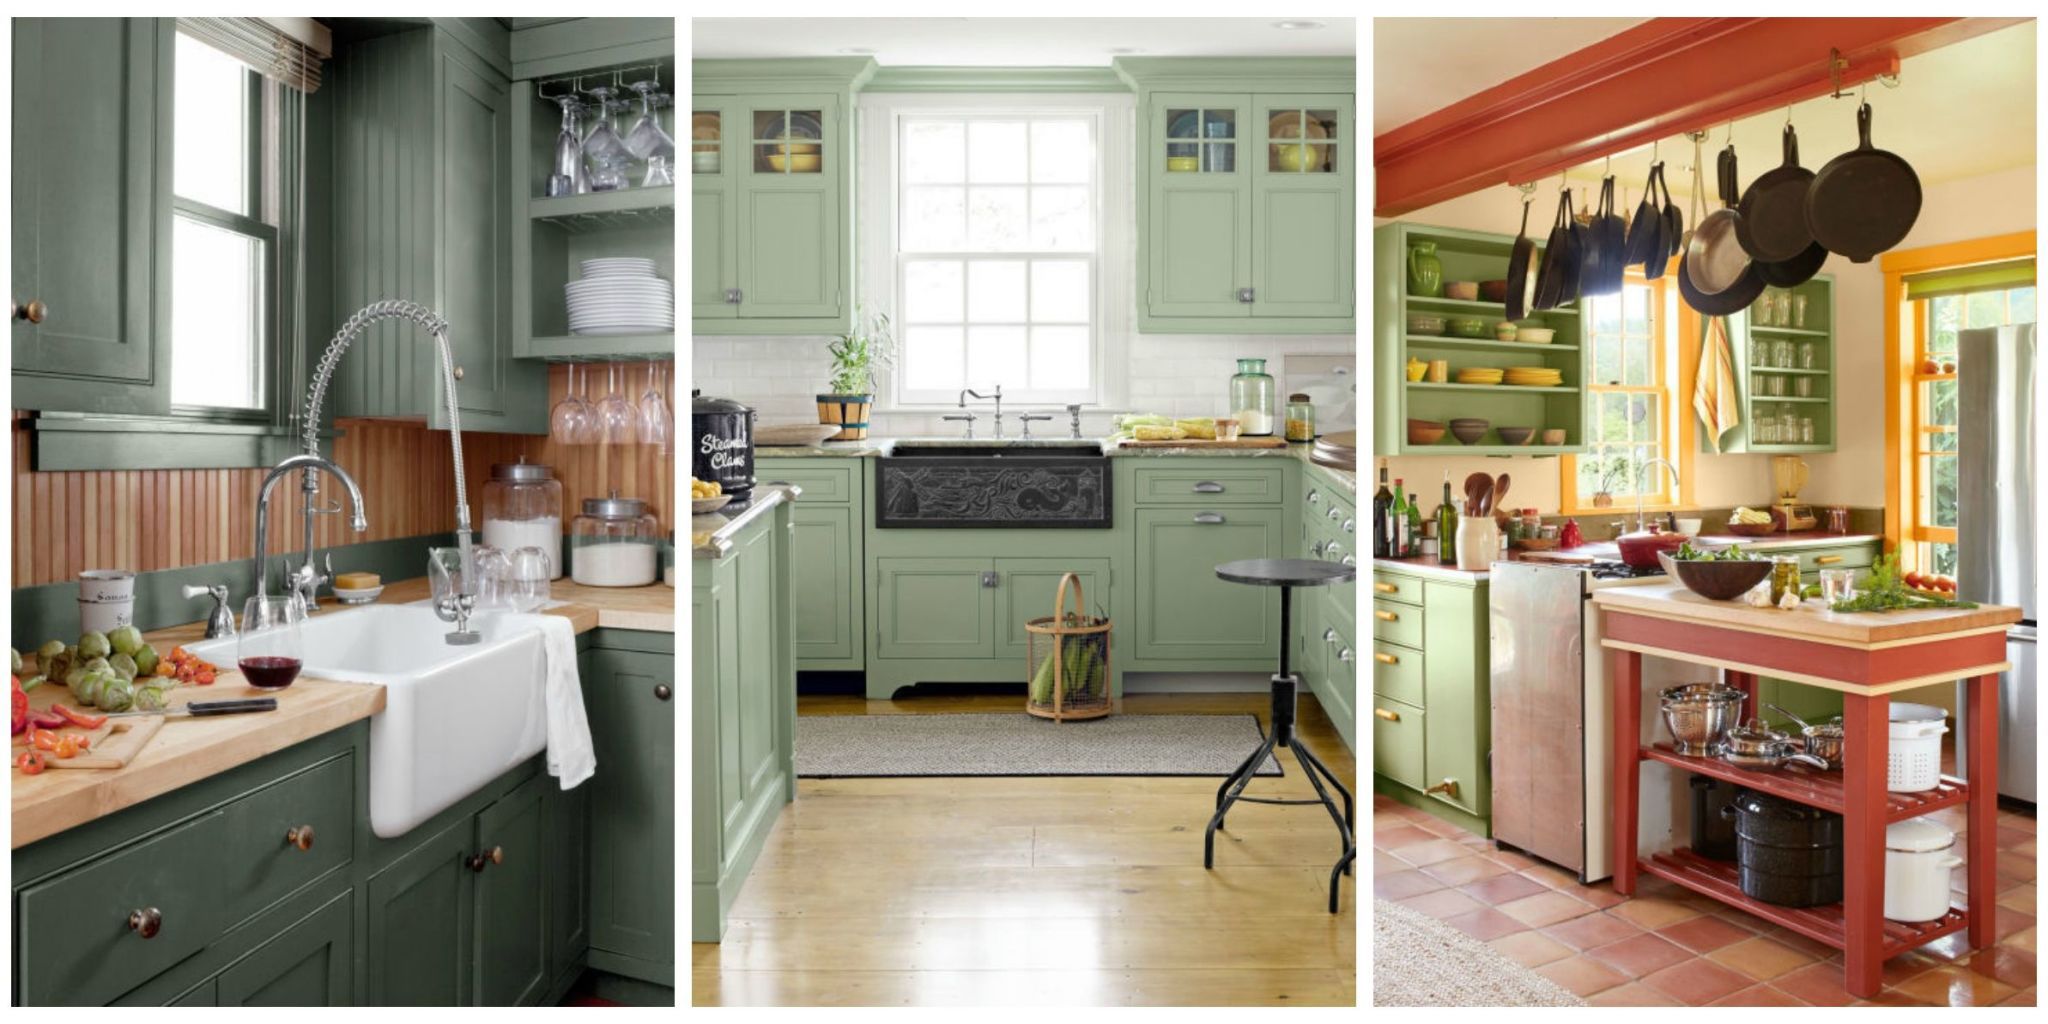 10 Green Kitchen Ideas - Best Green Paint Colors for Kitchens